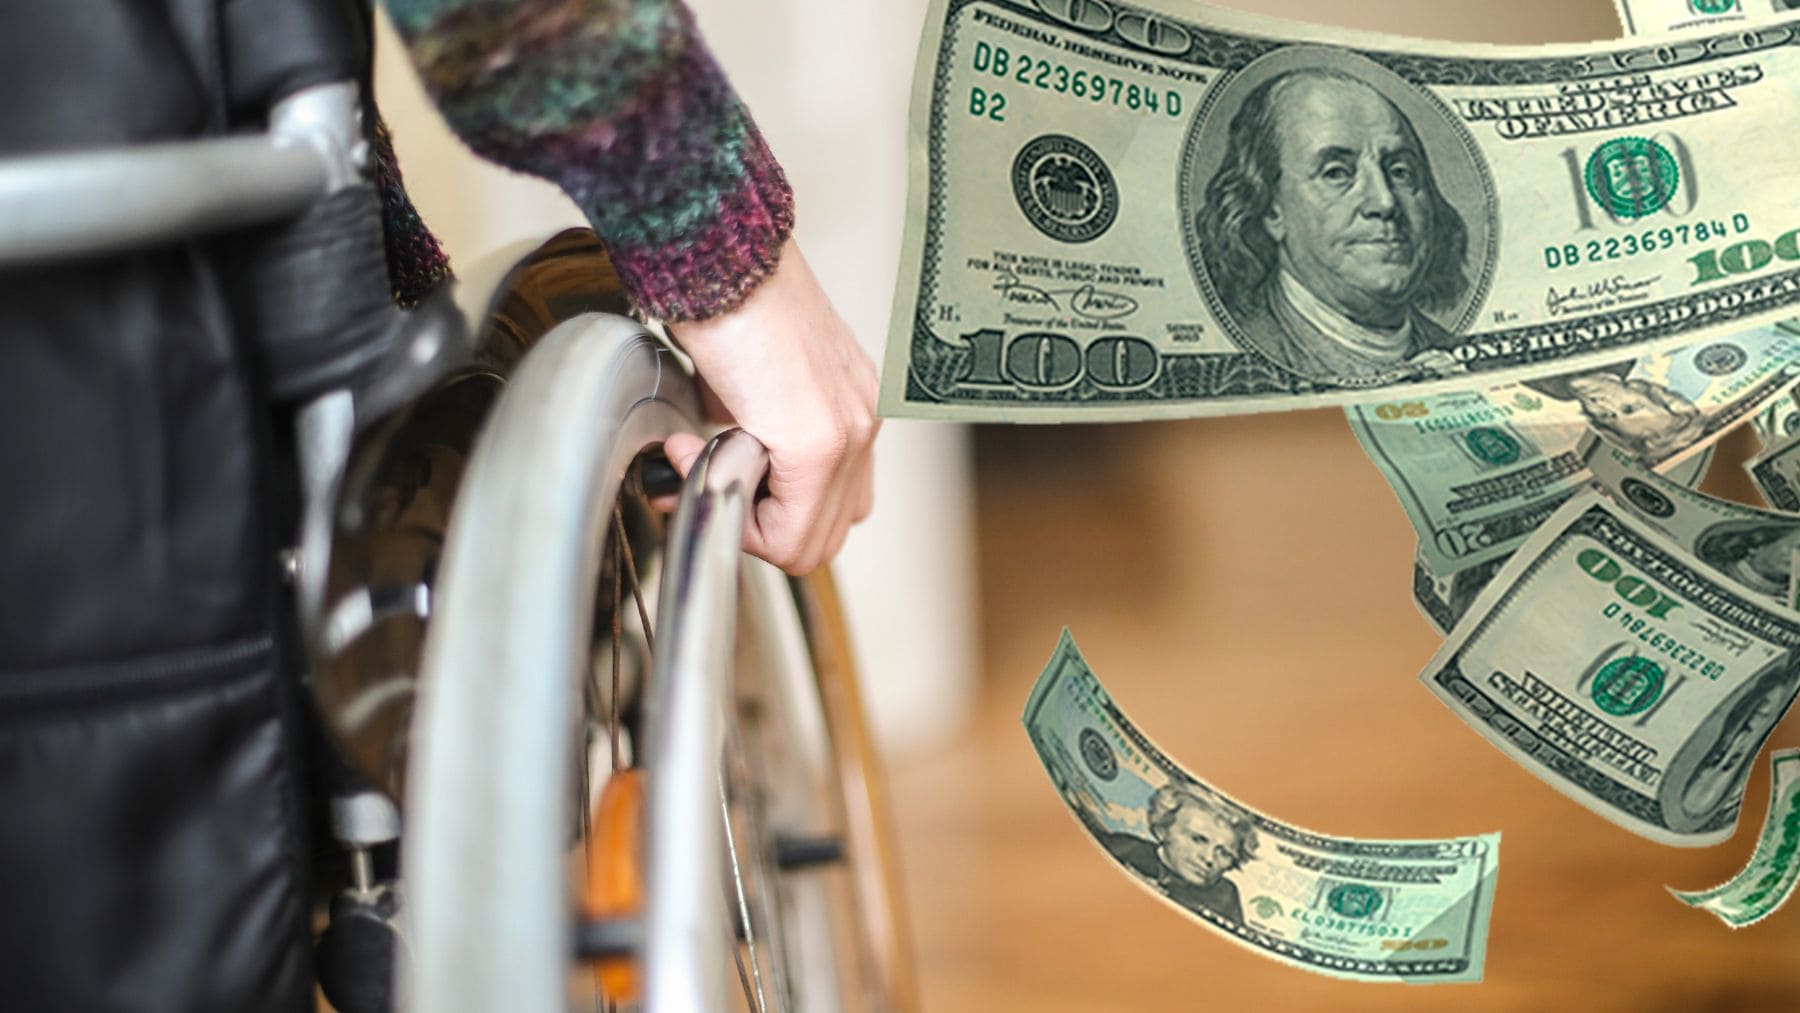 A person with a disability and dollars